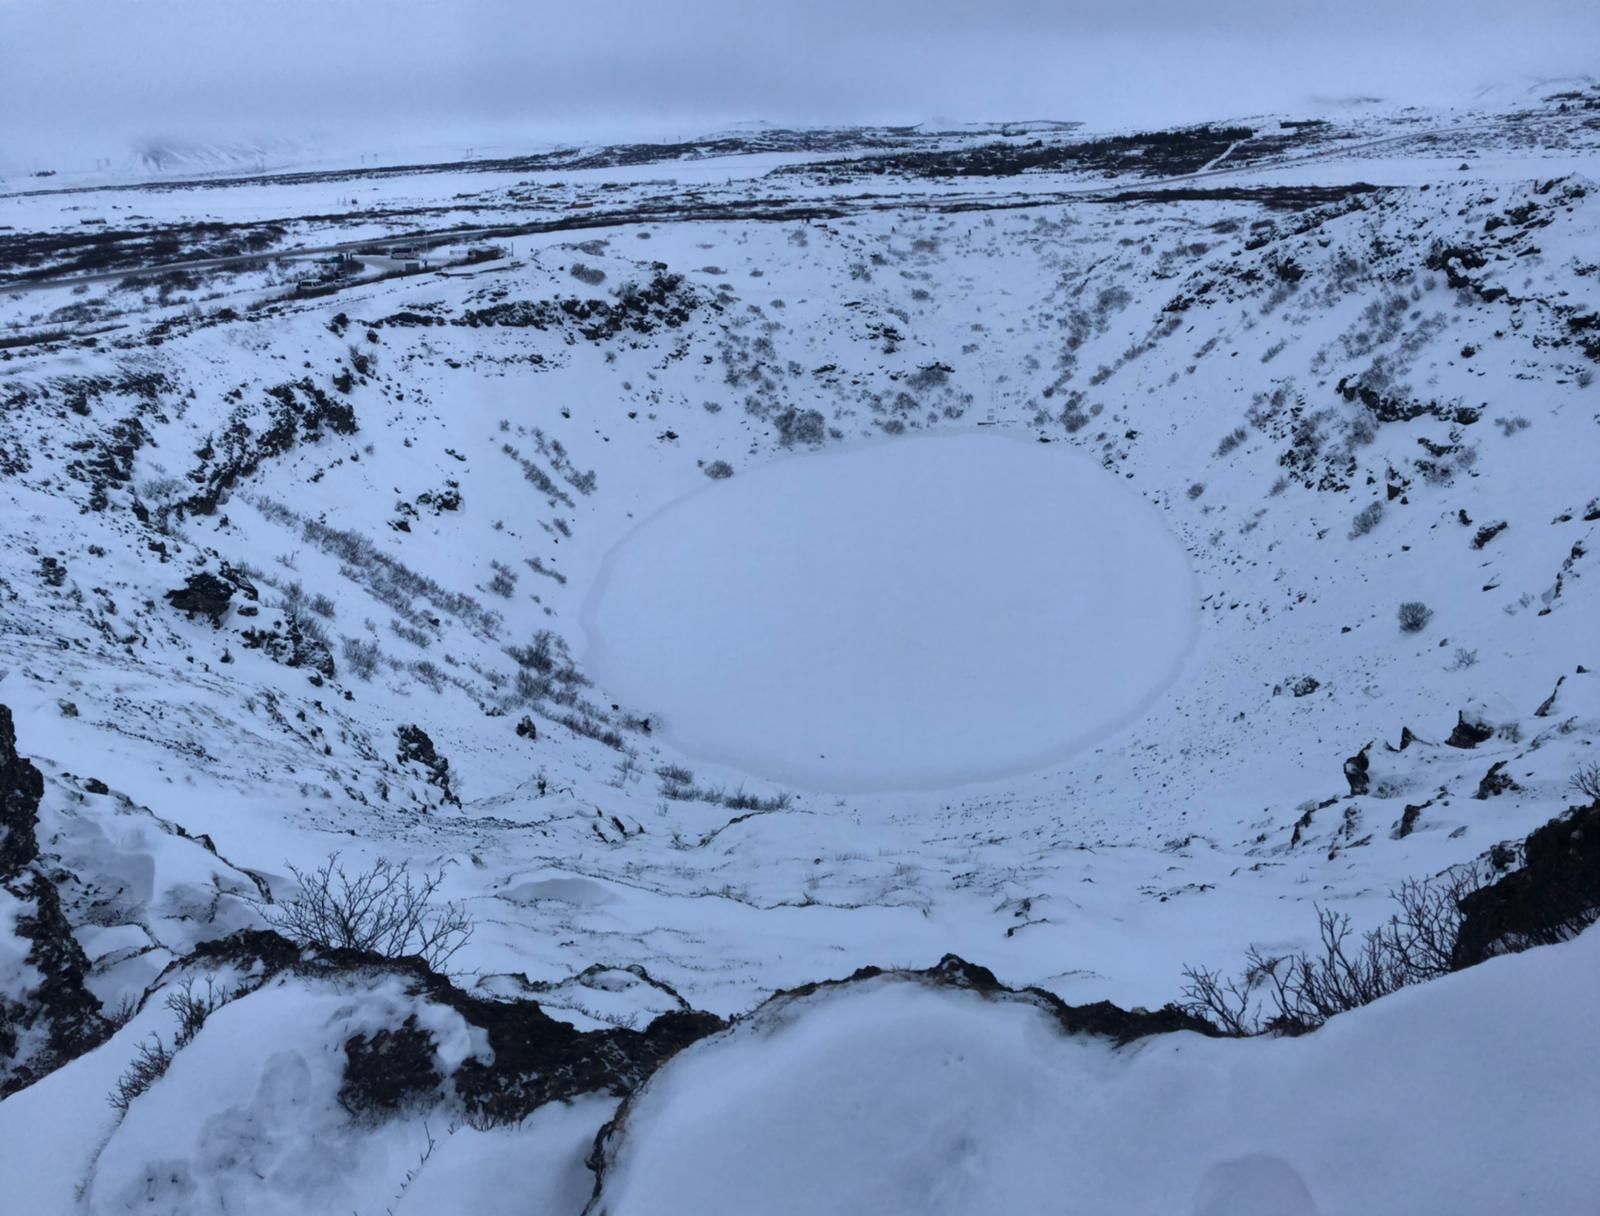 golden circle tour iceland kerid crater things to do in iceland in july